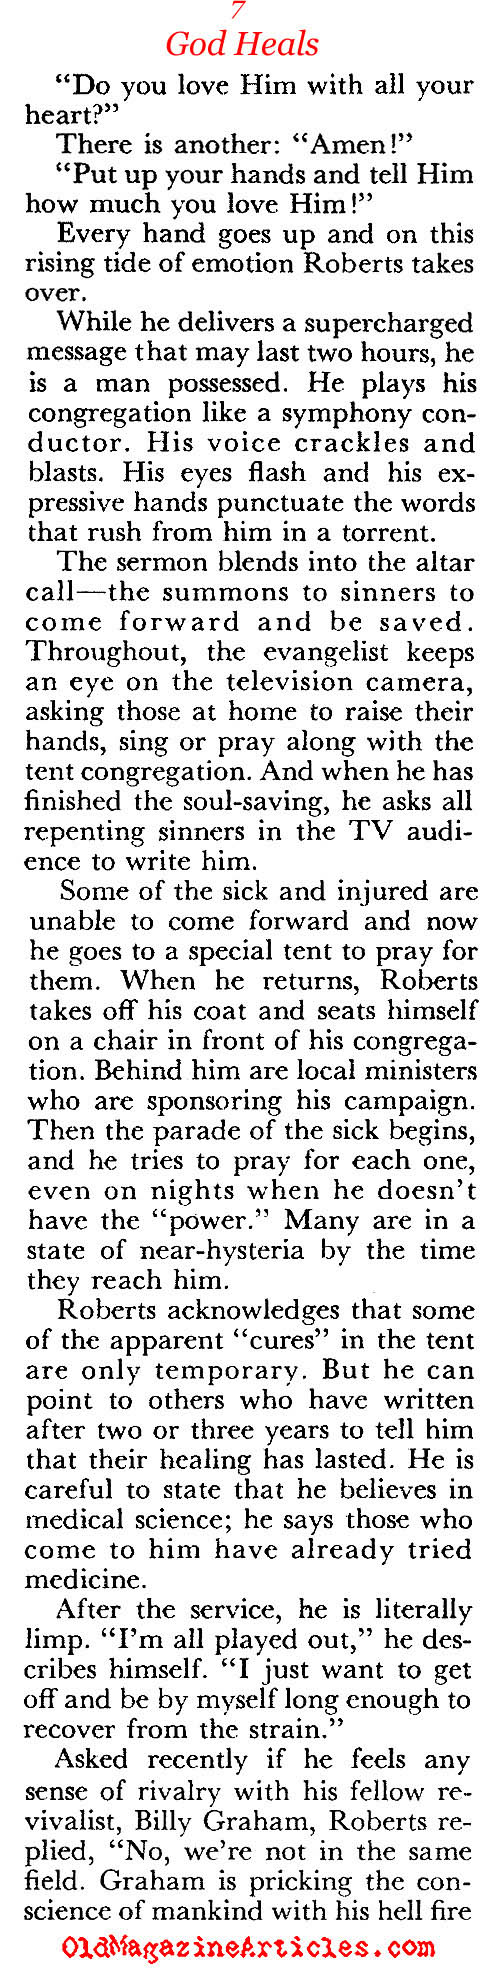 The Rise of Oral Roberts  (Coronet Magazine, 1955)